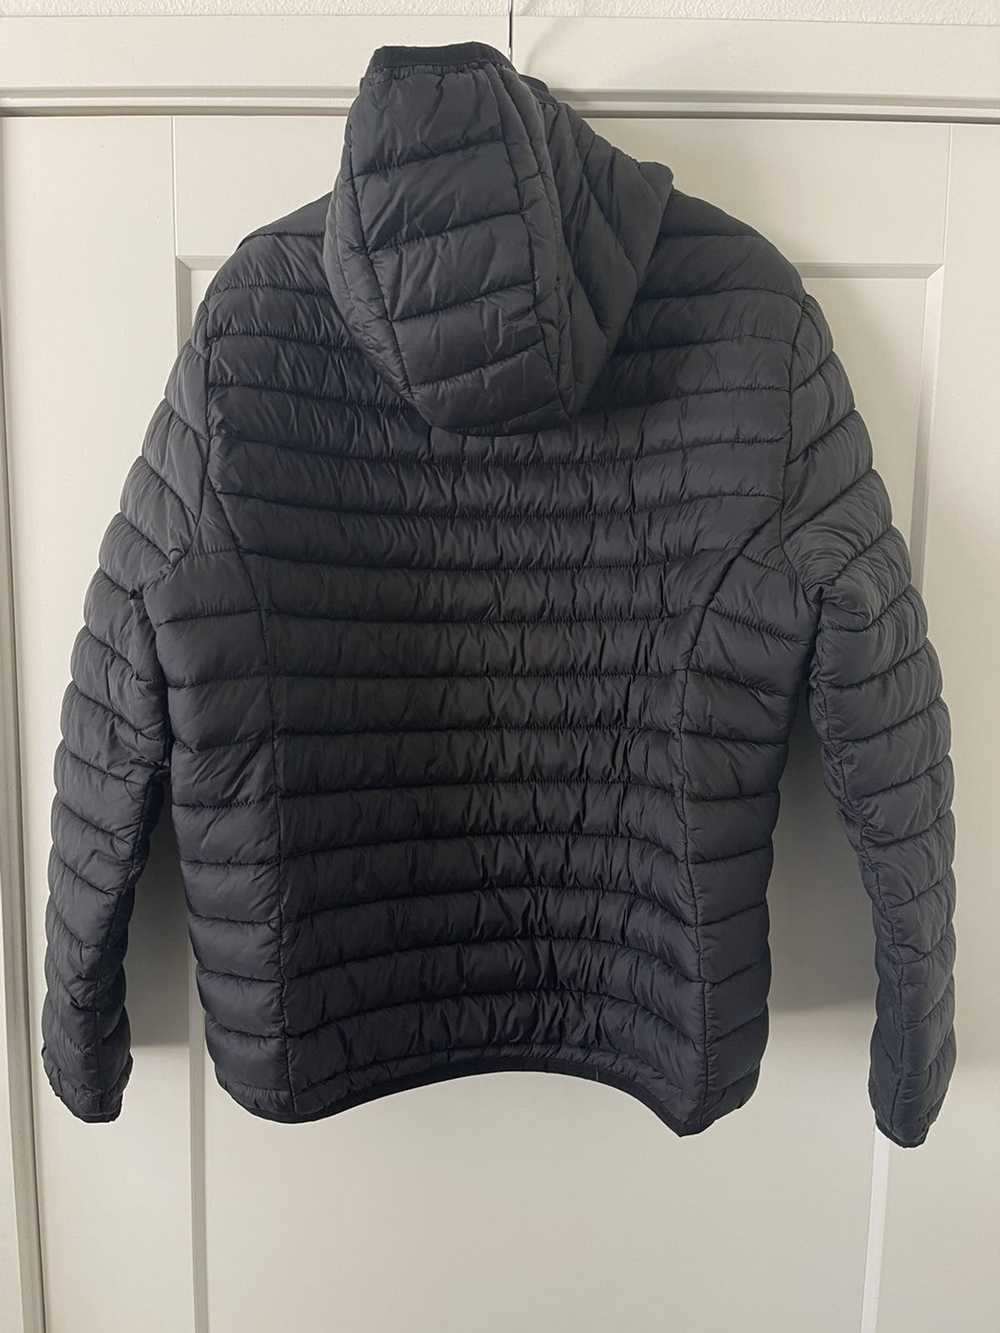 H&M Hooded Puffer Jacket - image 2